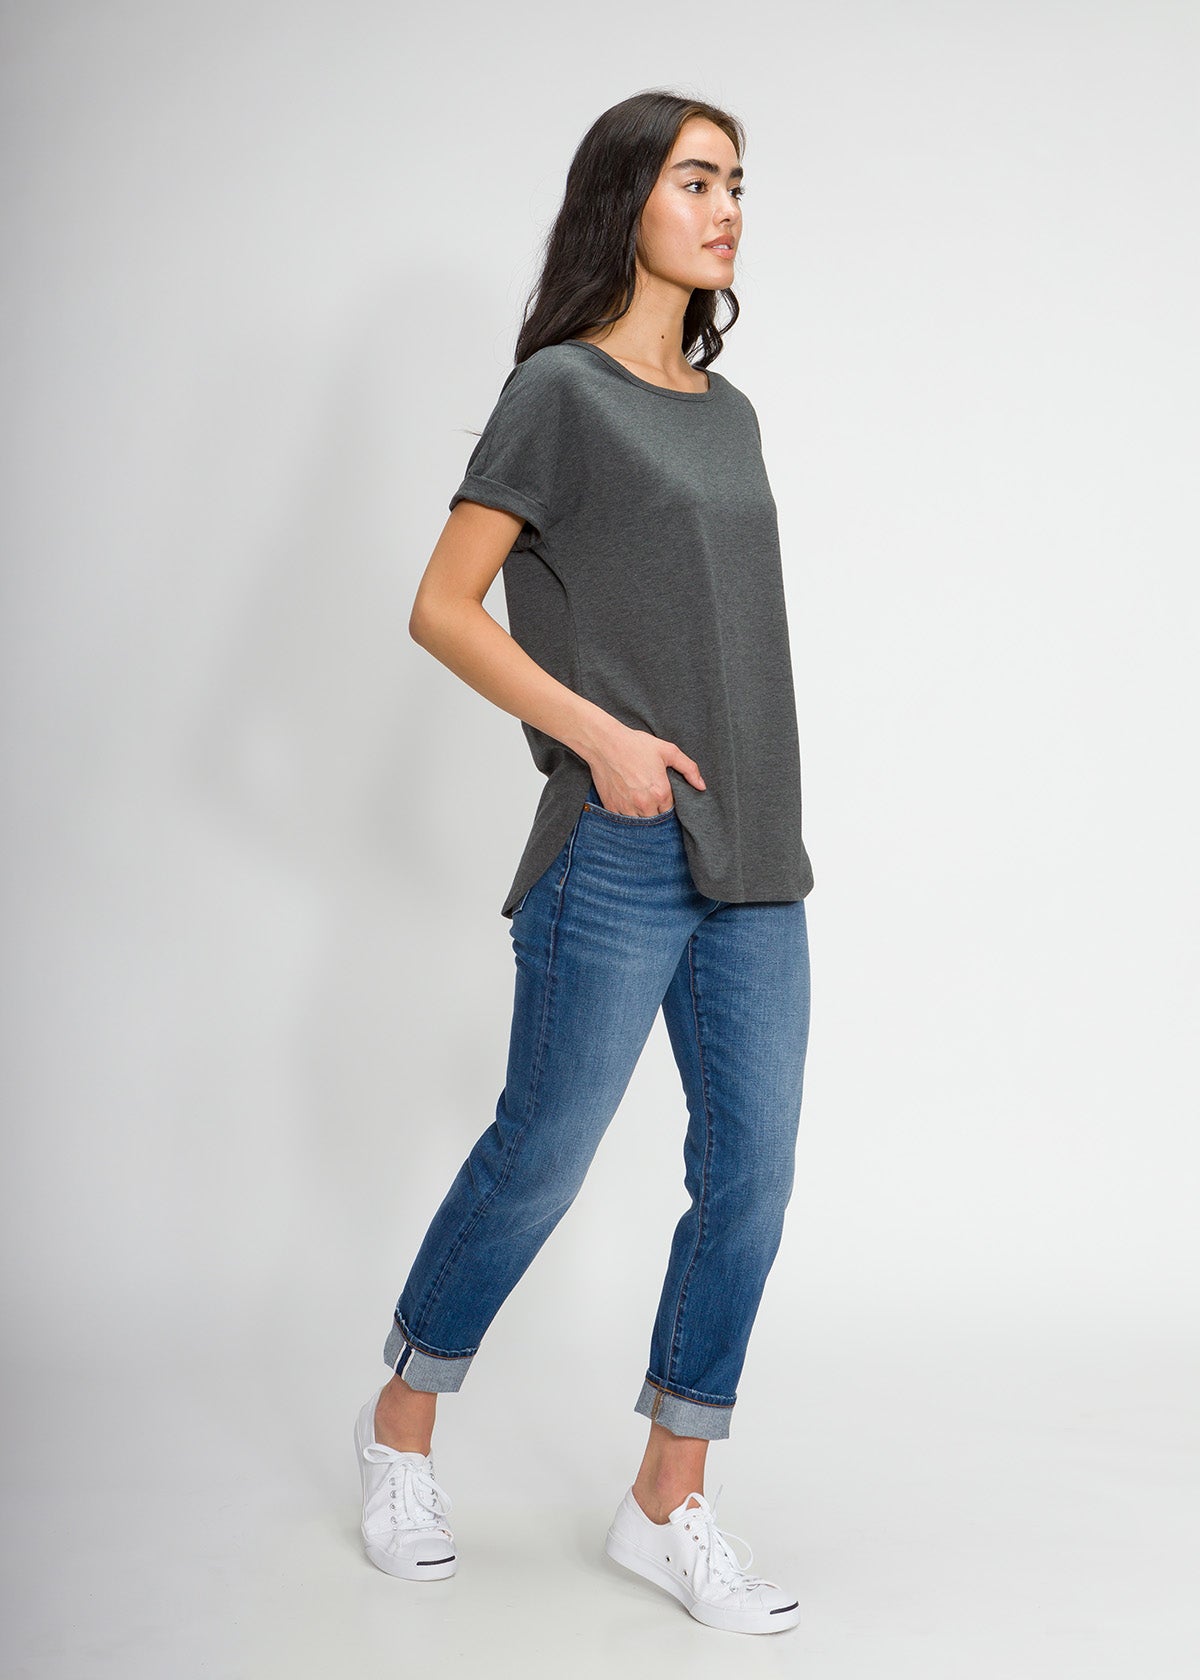 T-Shirt - Women's Relaxed Crew T-Shirt In Supima Cotton Stretch